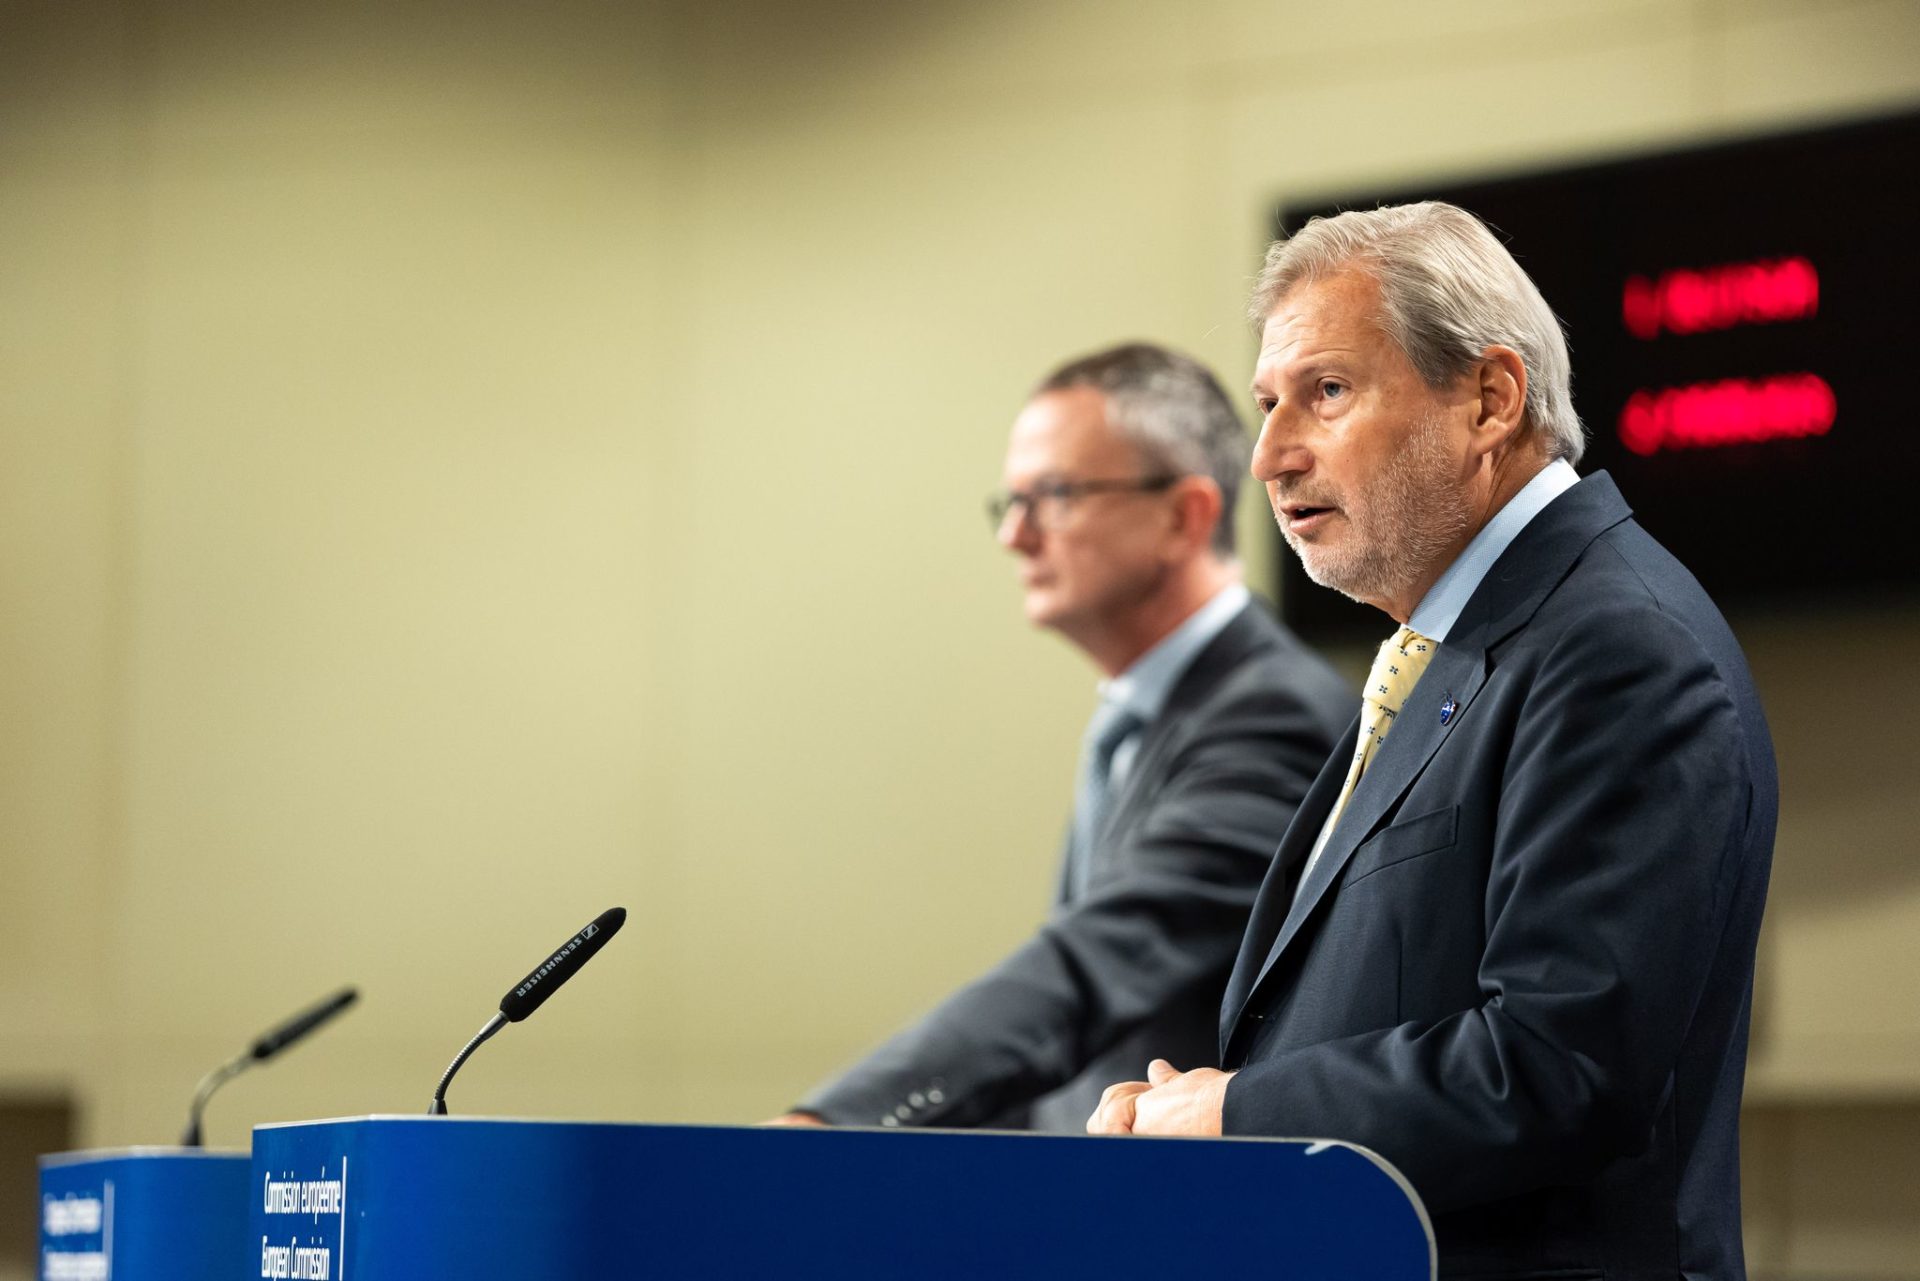 Johannes Hahn, European Commissioner for Budget and Administration, gives a press conference following the weekly meeting of the von der Leyen Commission on the protection of the EU budget in Hungary.